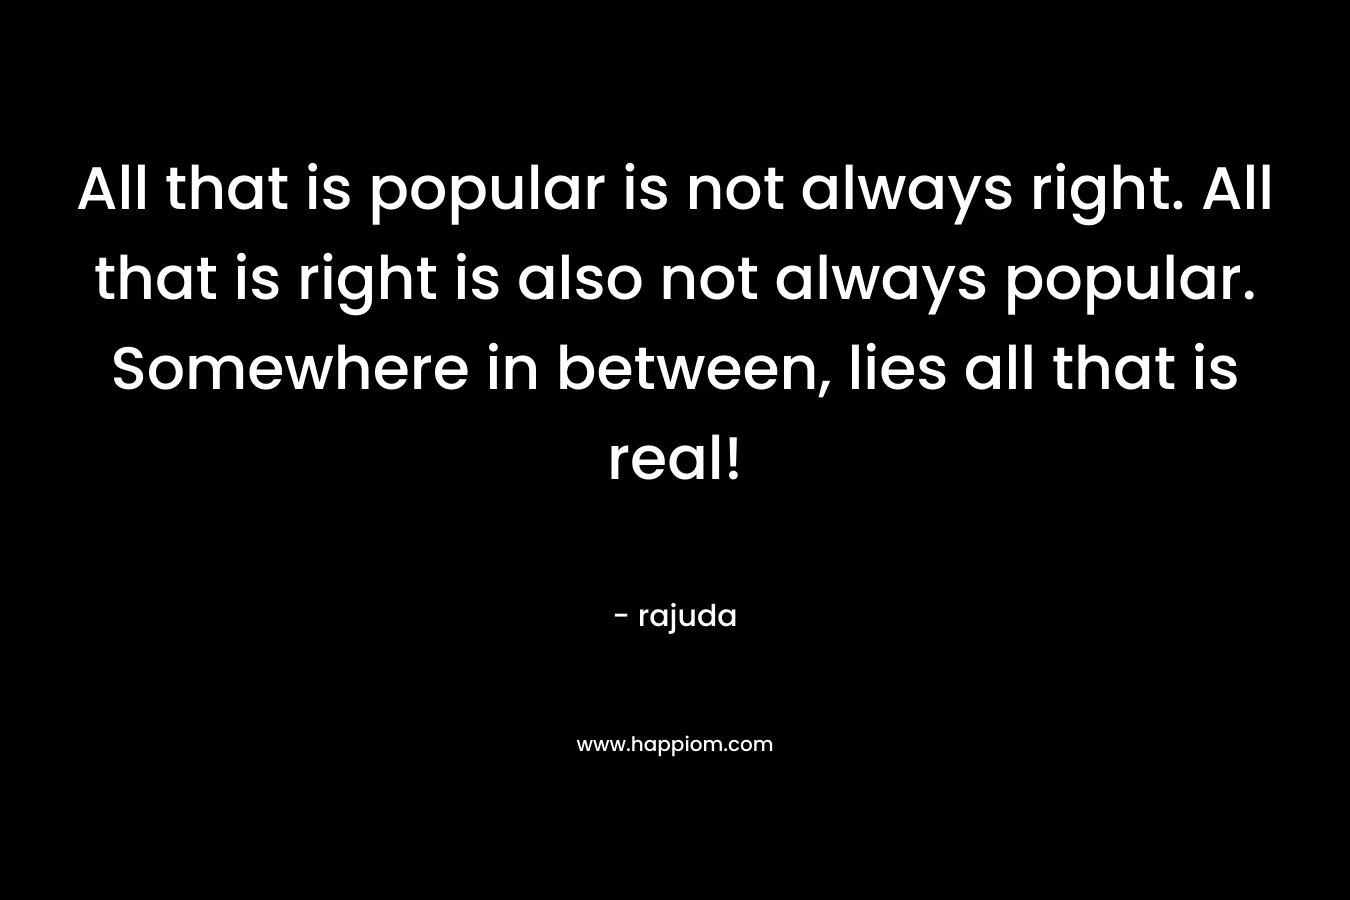 All that is popular is not always right. All that is right is also not always popular. Somewhere in between, lies all that is real!